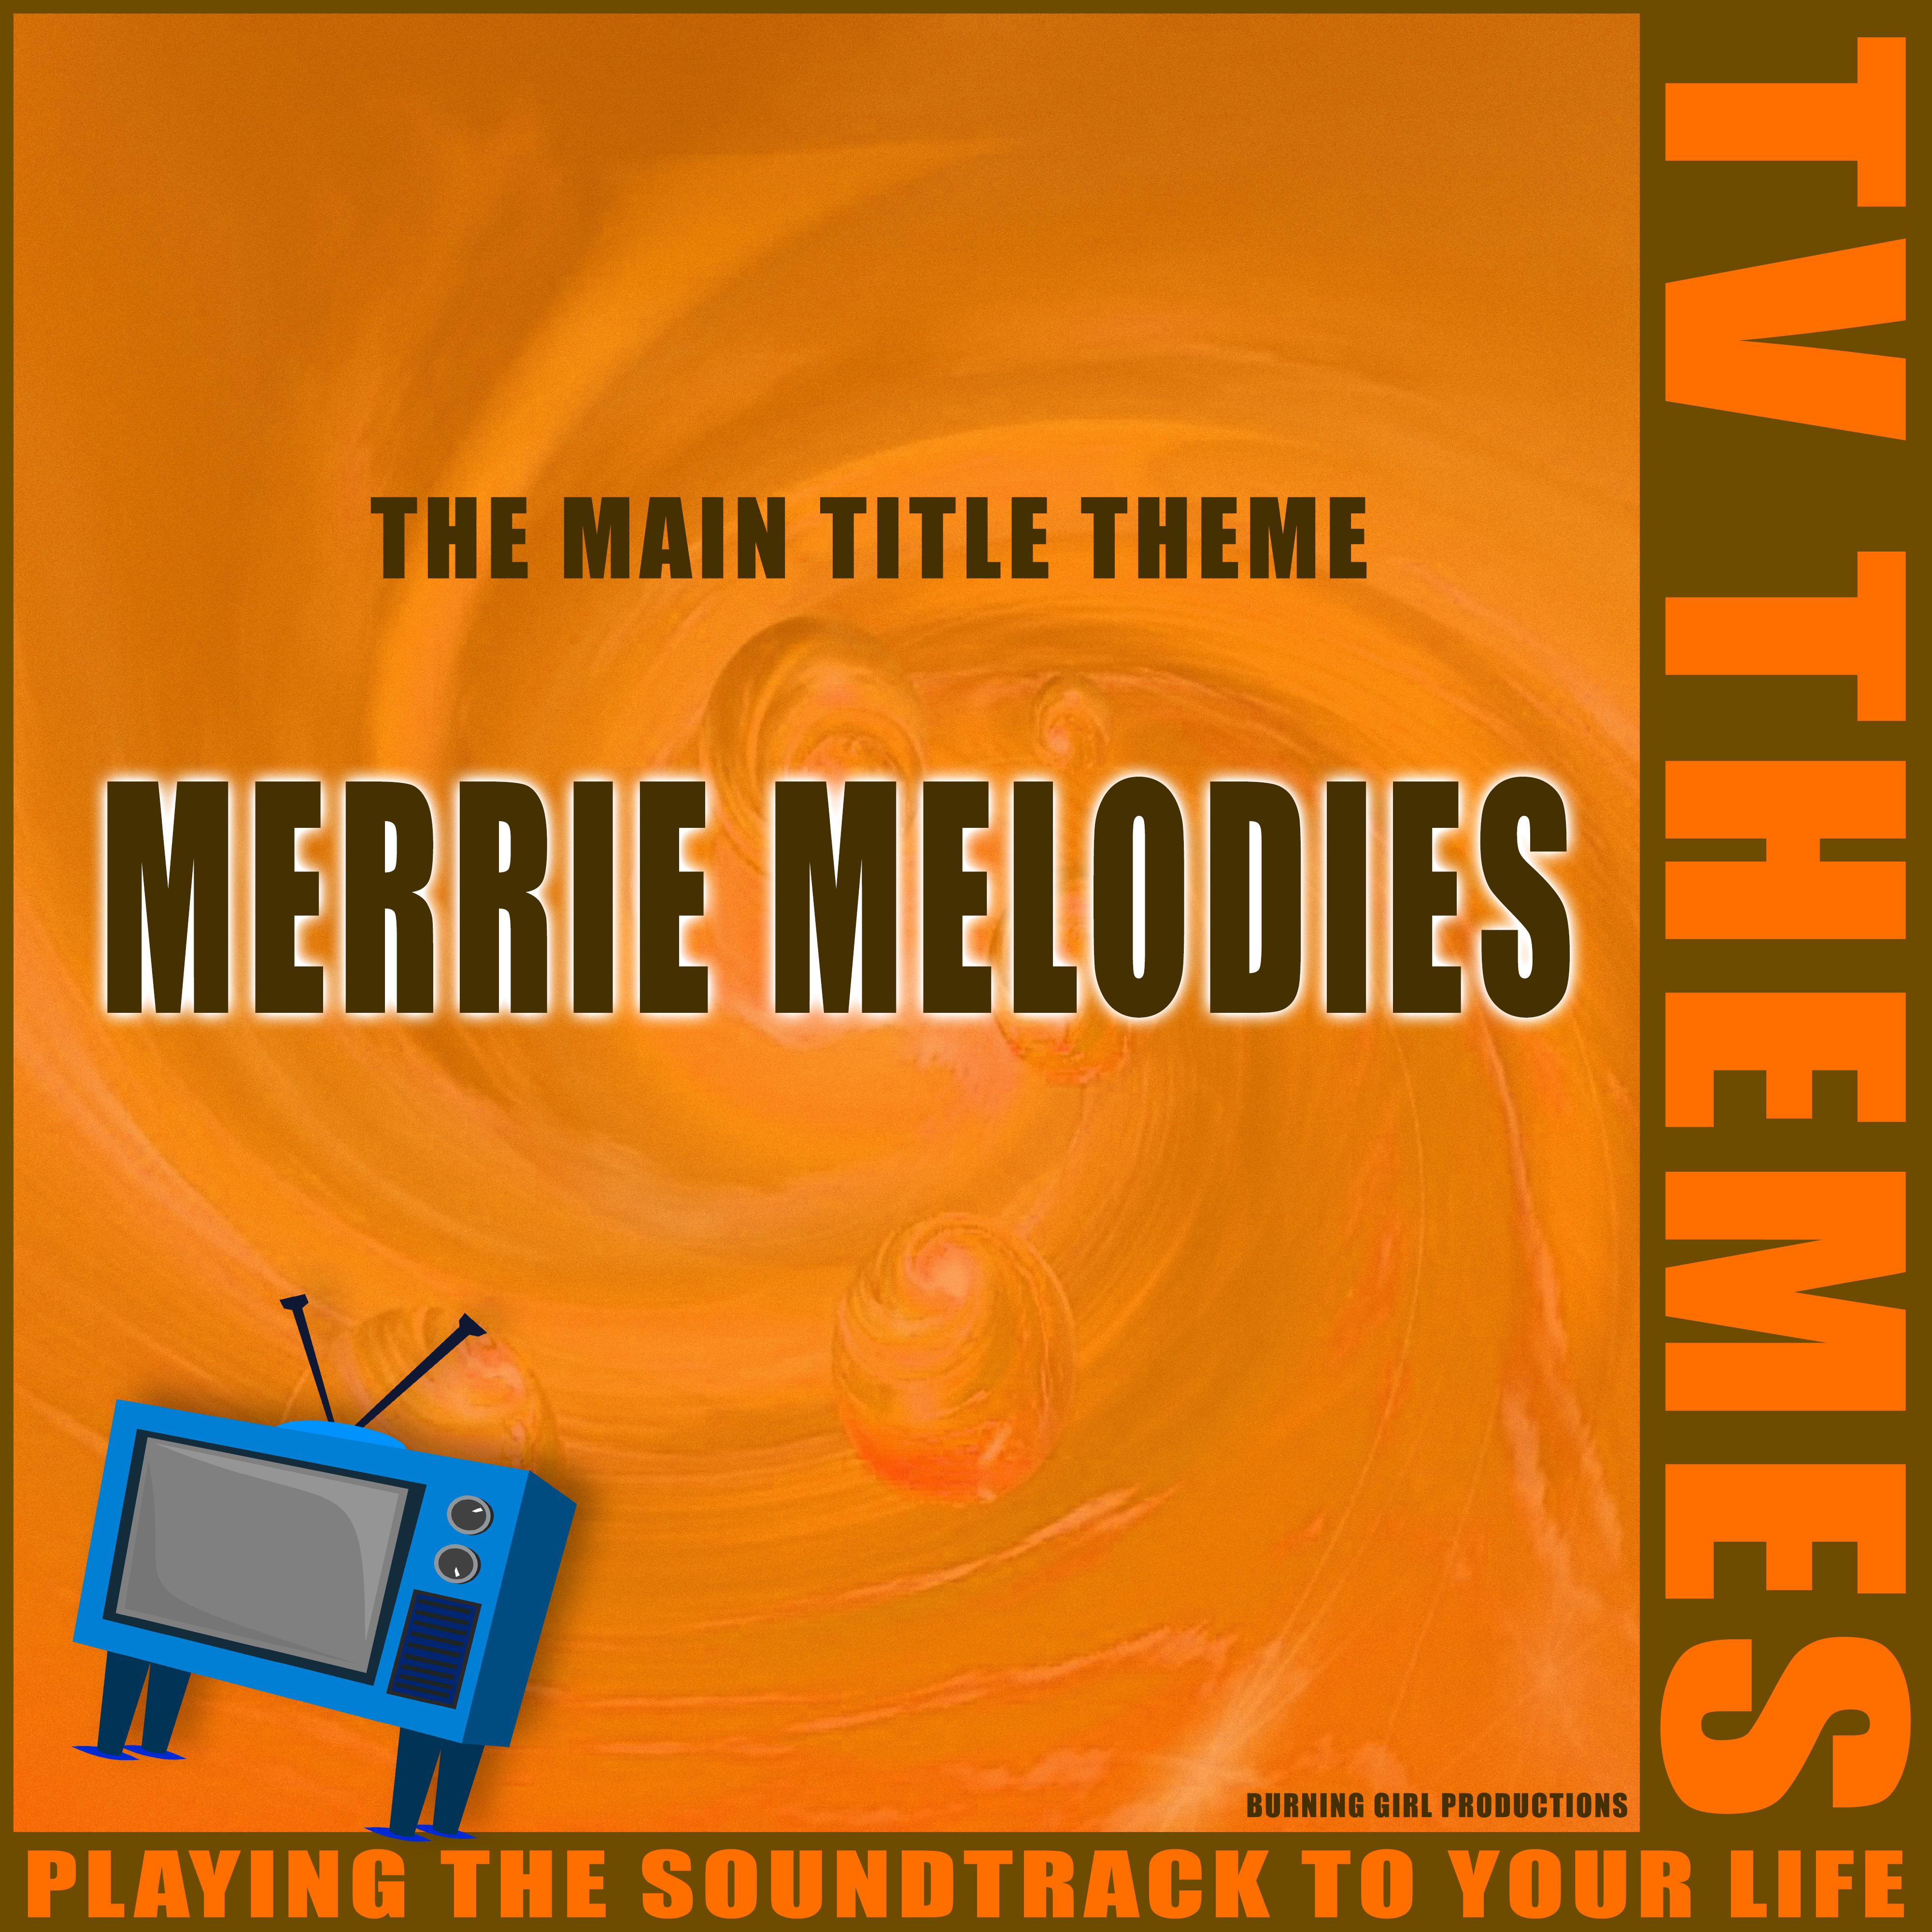 Merrie Melodies - The Main Title Theme